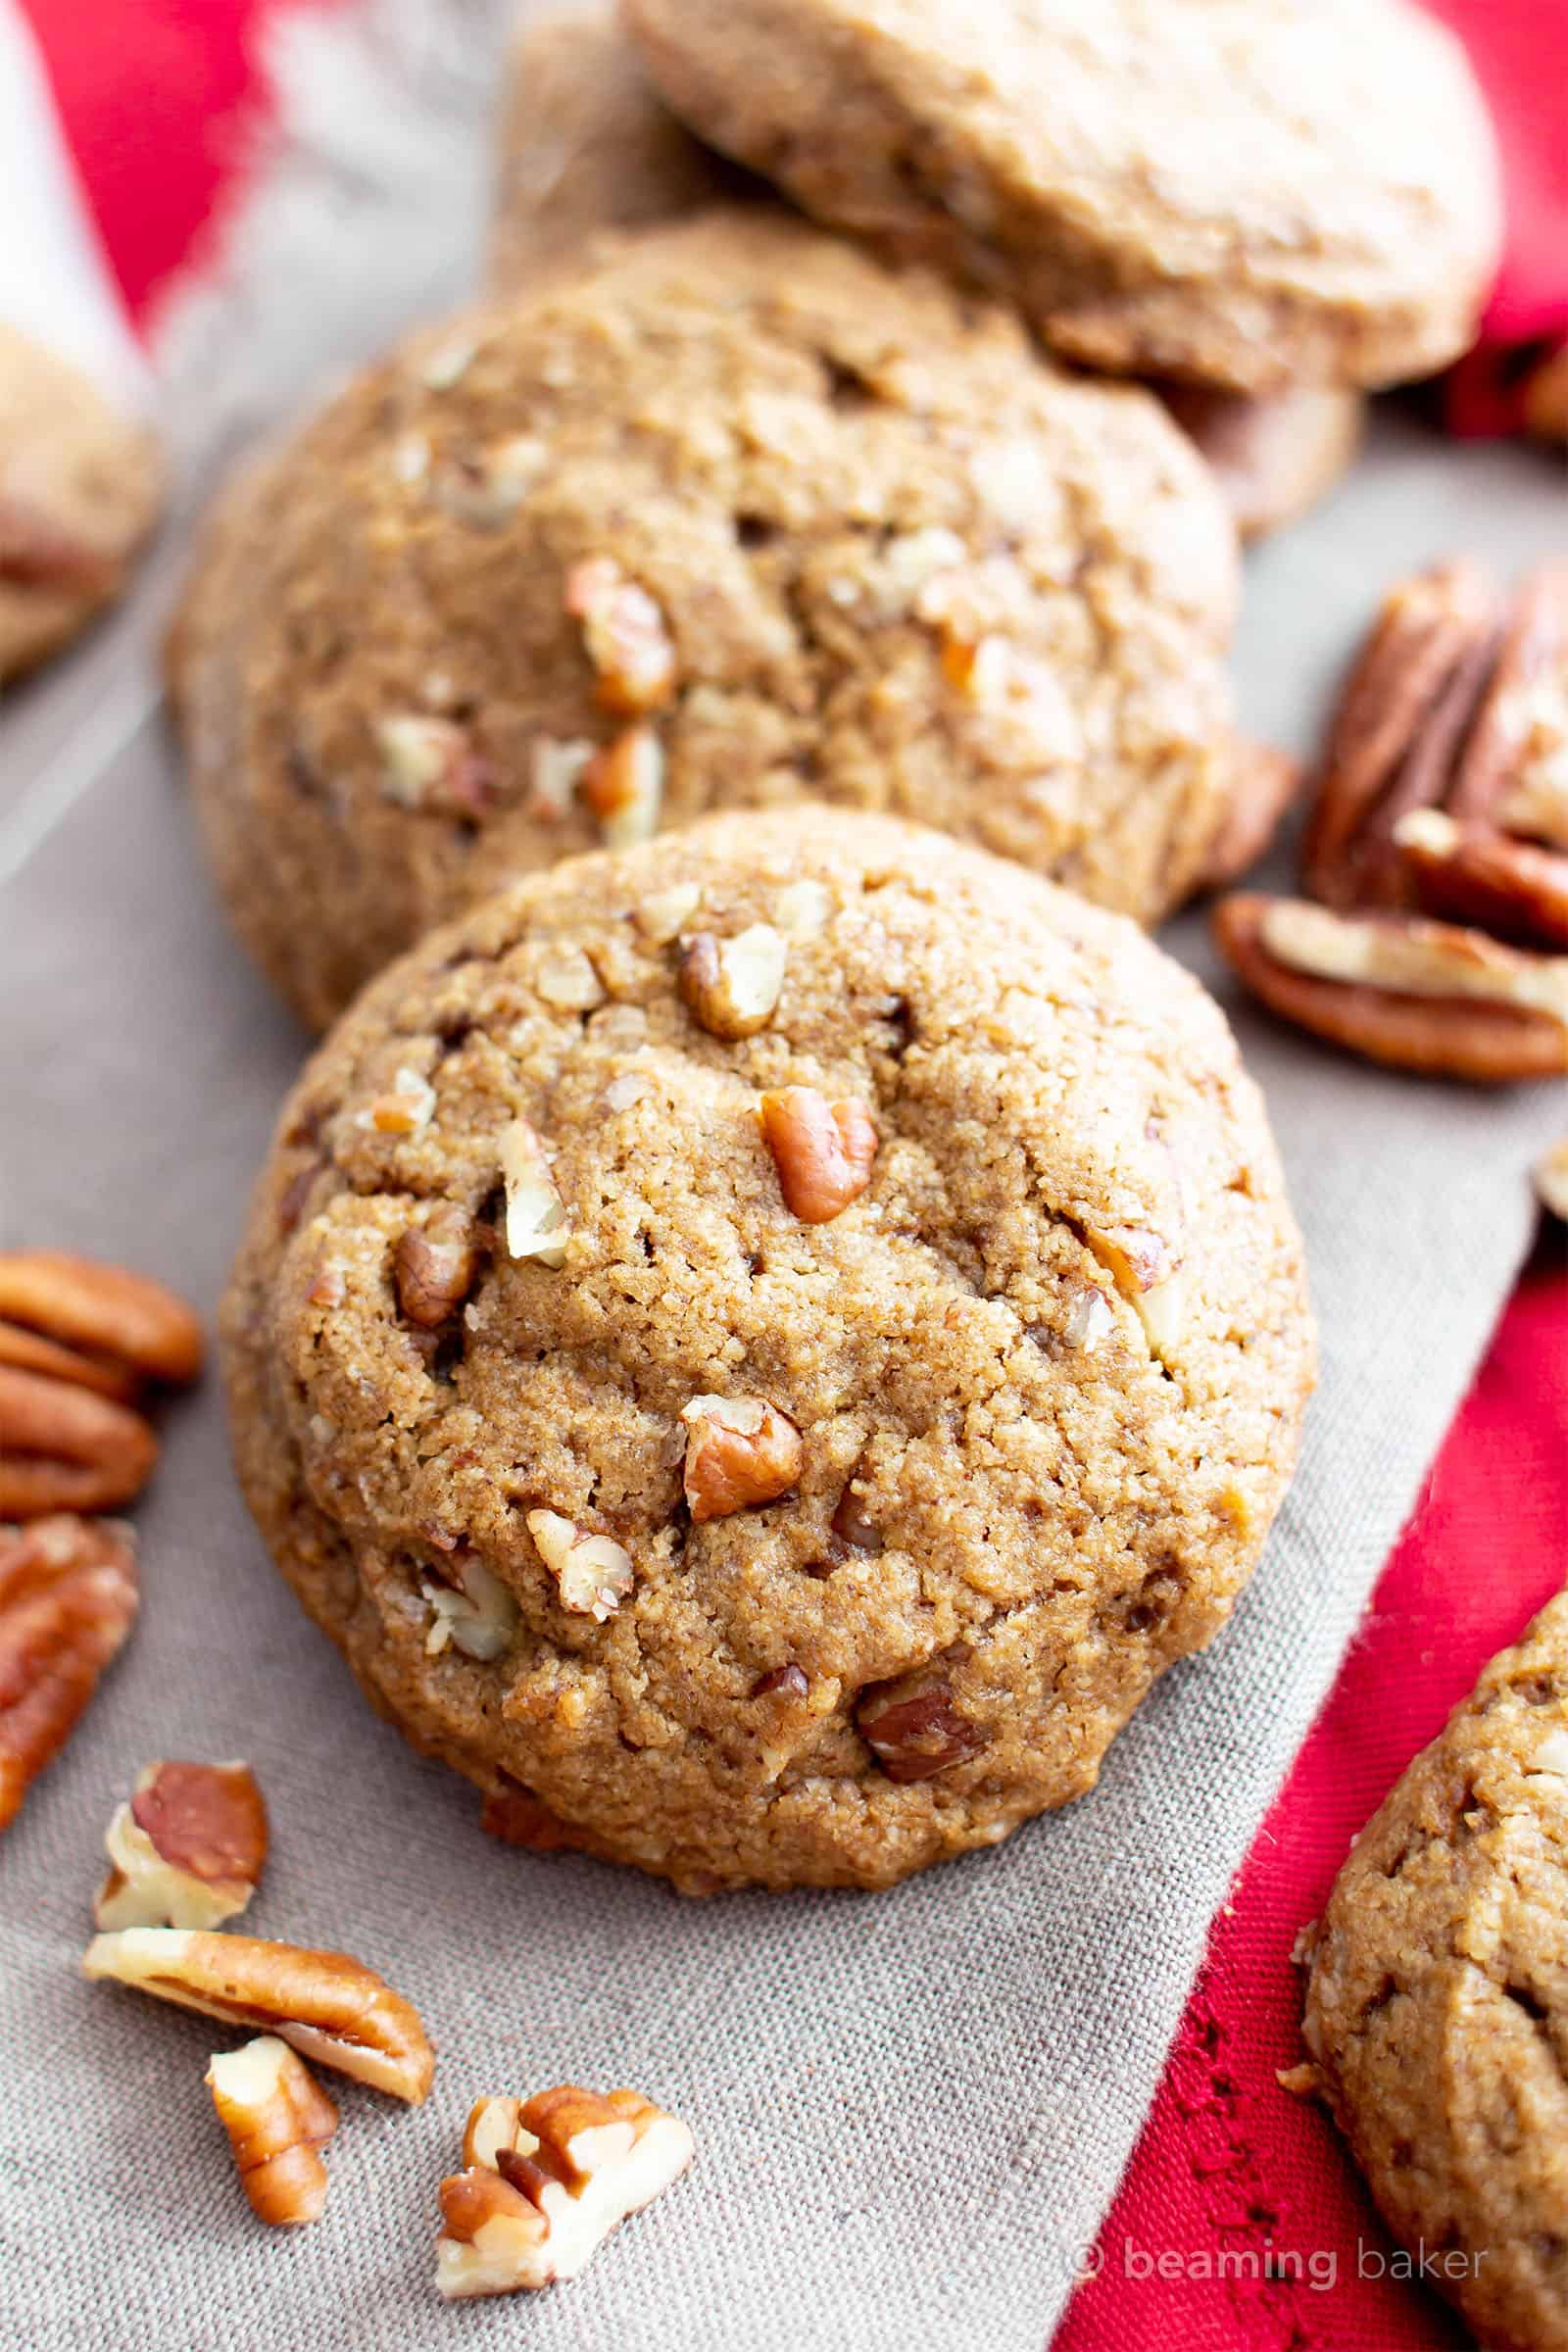 Easy Vegan Cinnamon Pecan Cookies (V, GF): a 1-bowl recipe for chewy on the outside, soft on the inside buttery gluten free pecan cookies bursting with pecan crunch and a cinnamon kick! Made with healthy ingredients. #Cookies #BeamingBaker #Vegan #GlutenFree #GlutenFreeCookies #Christmas #HealthyBaking #VeganCookies | Recipe at BeamingBaker.com